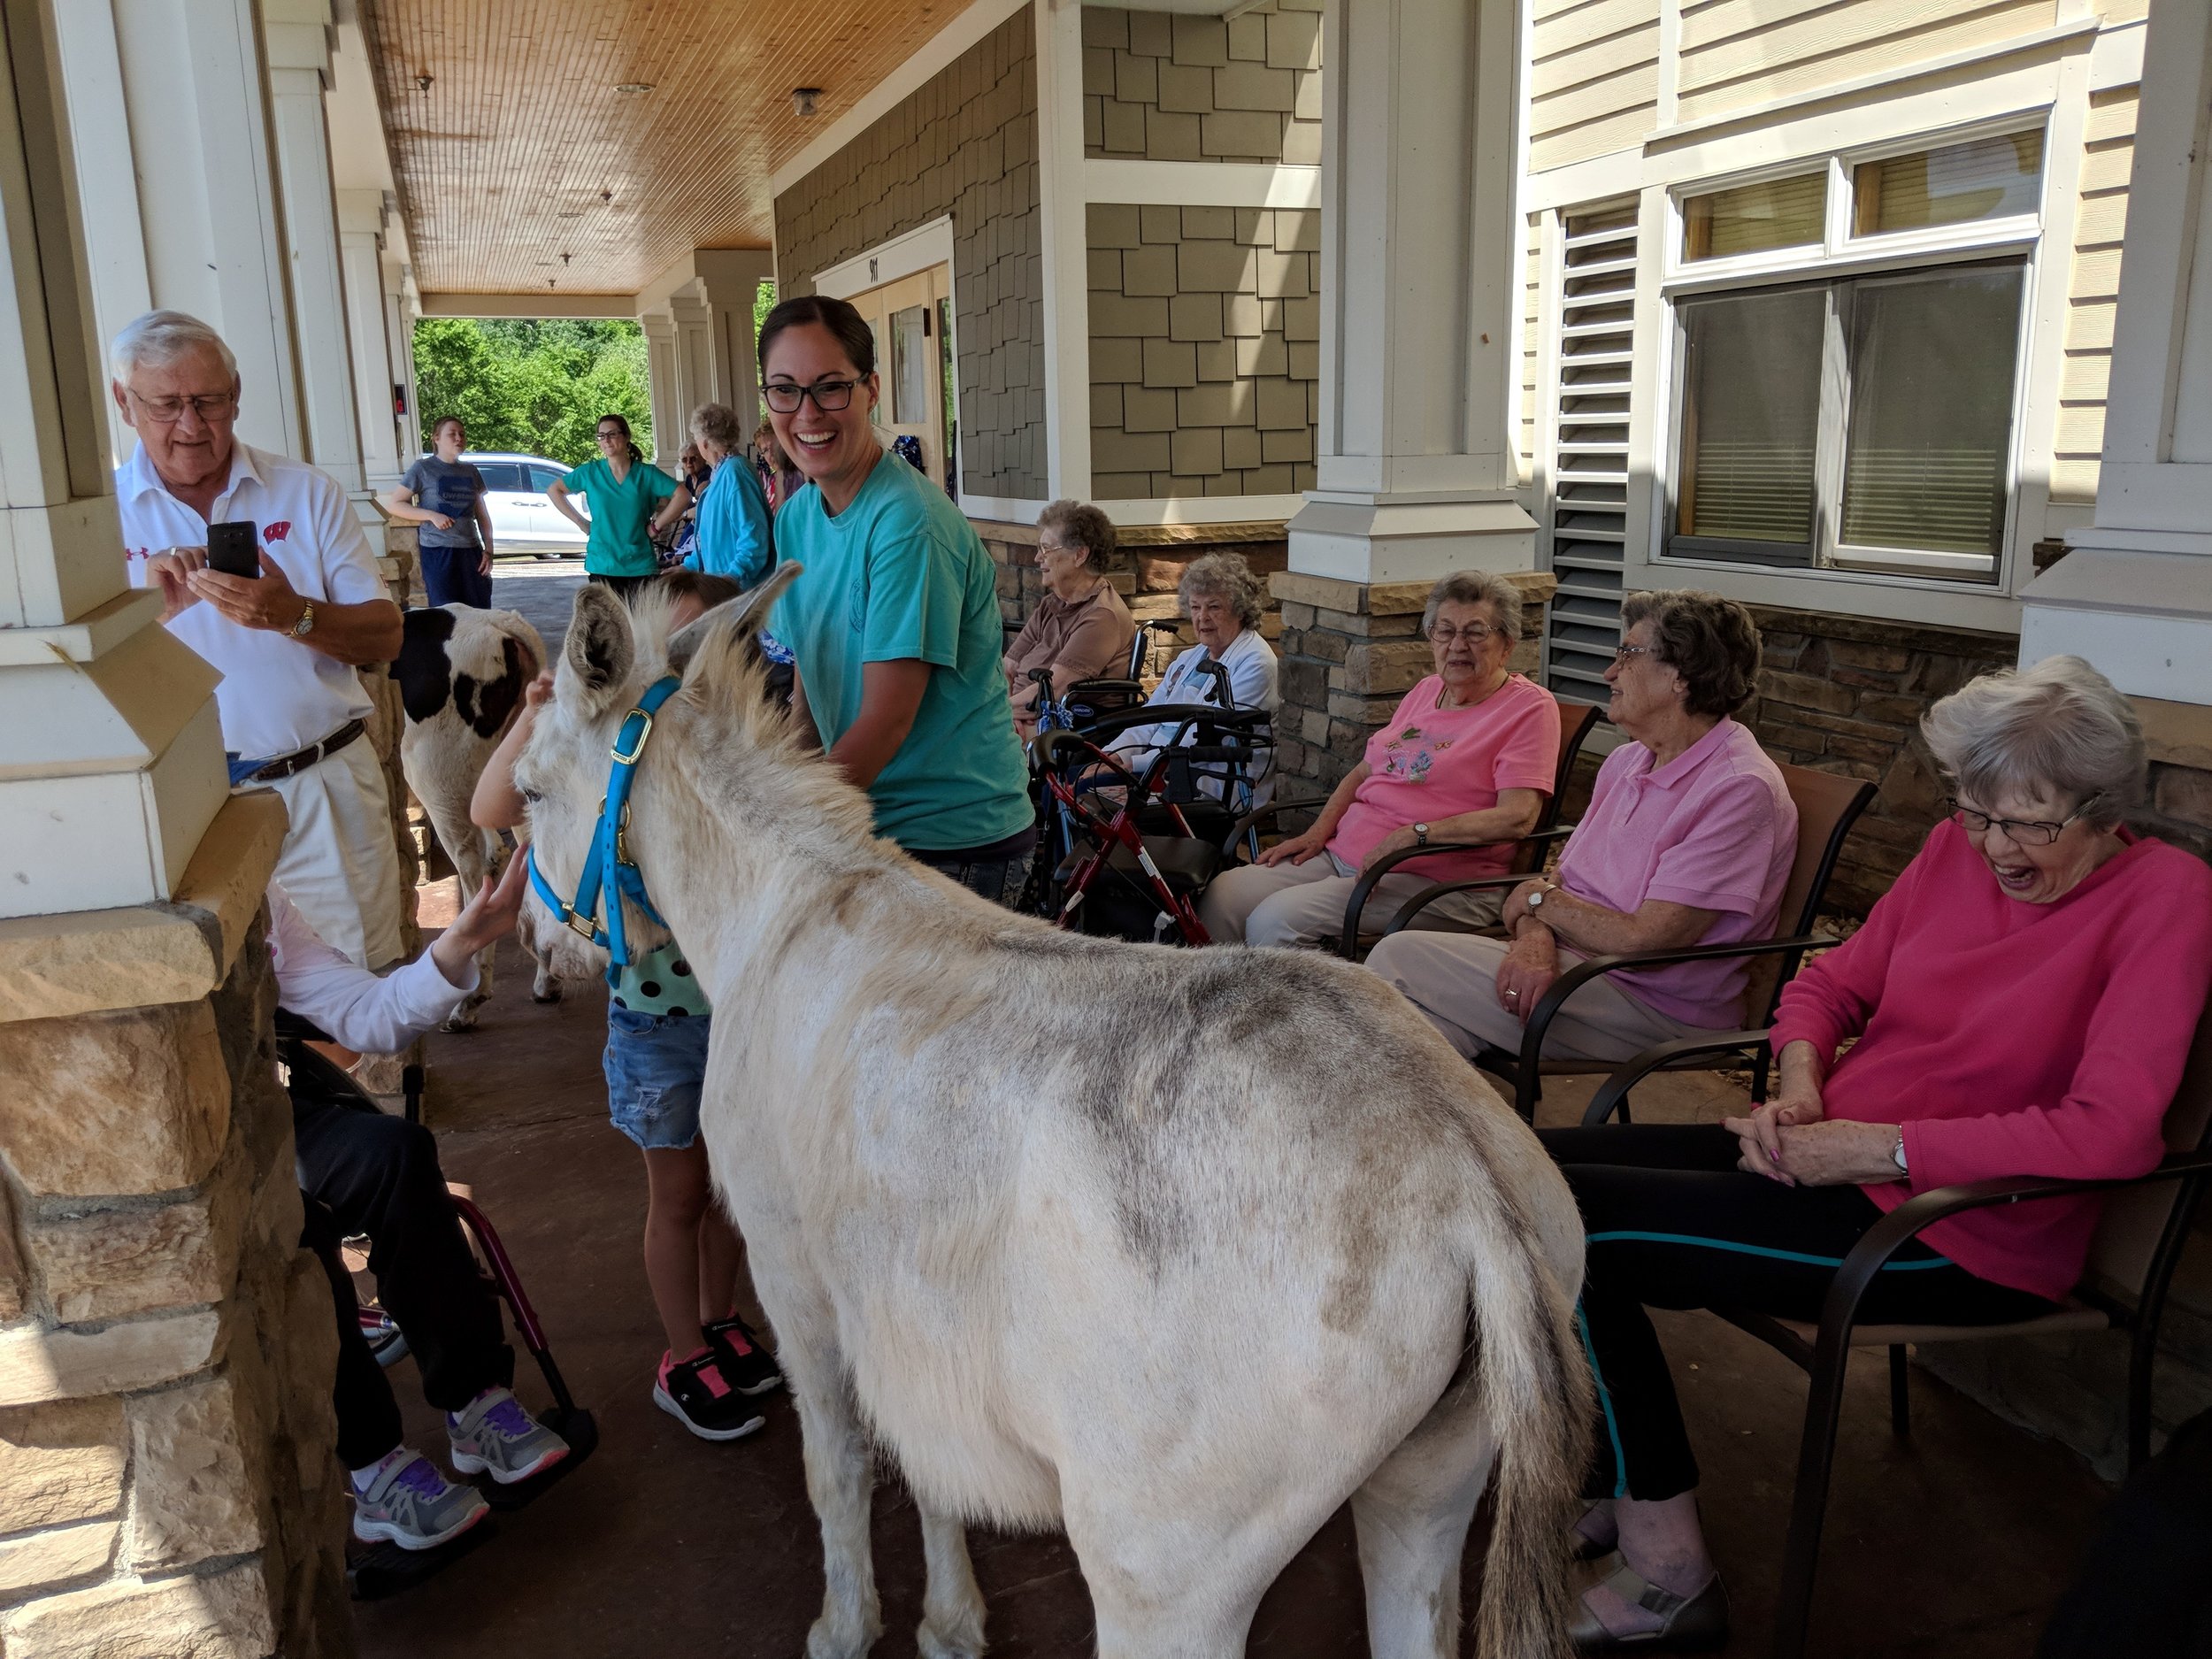 A visit from a fair calf & a donkey!! Thank you Courtney for sharing your time and animals with our tenants! 5.jpg